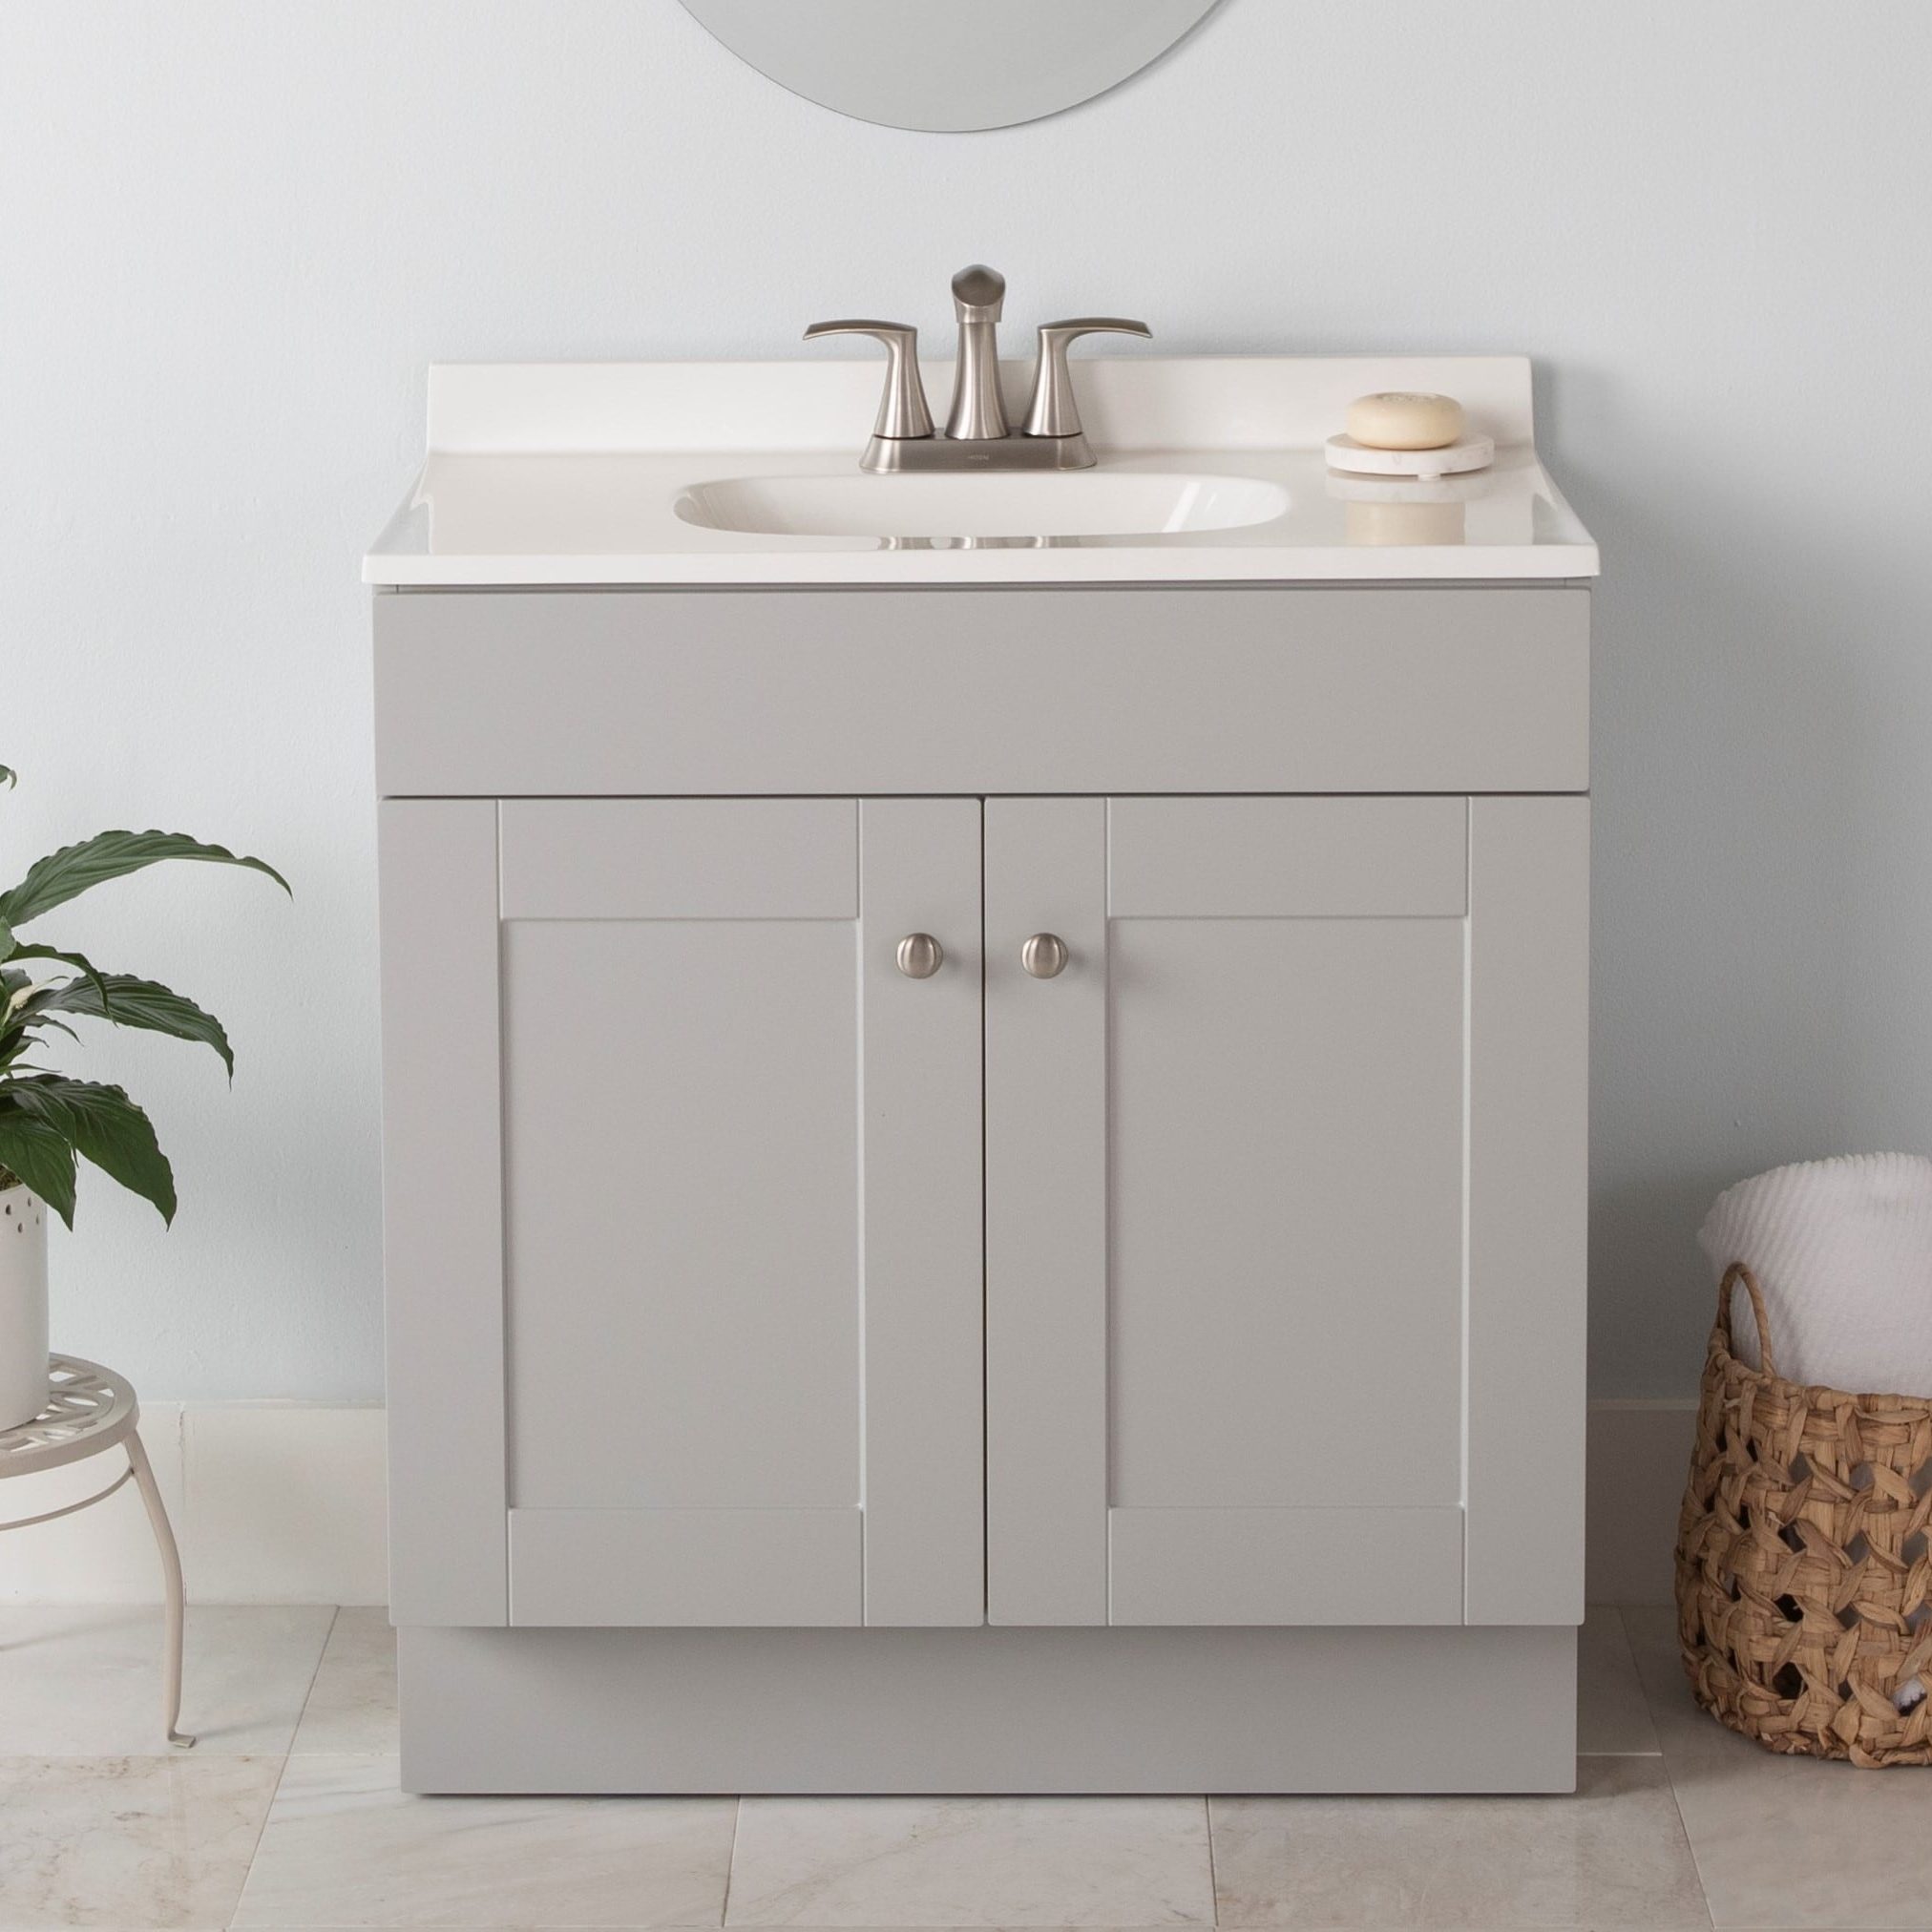 Project Source 20 Inch Gray Vanity Ecomm Via Lowes.com